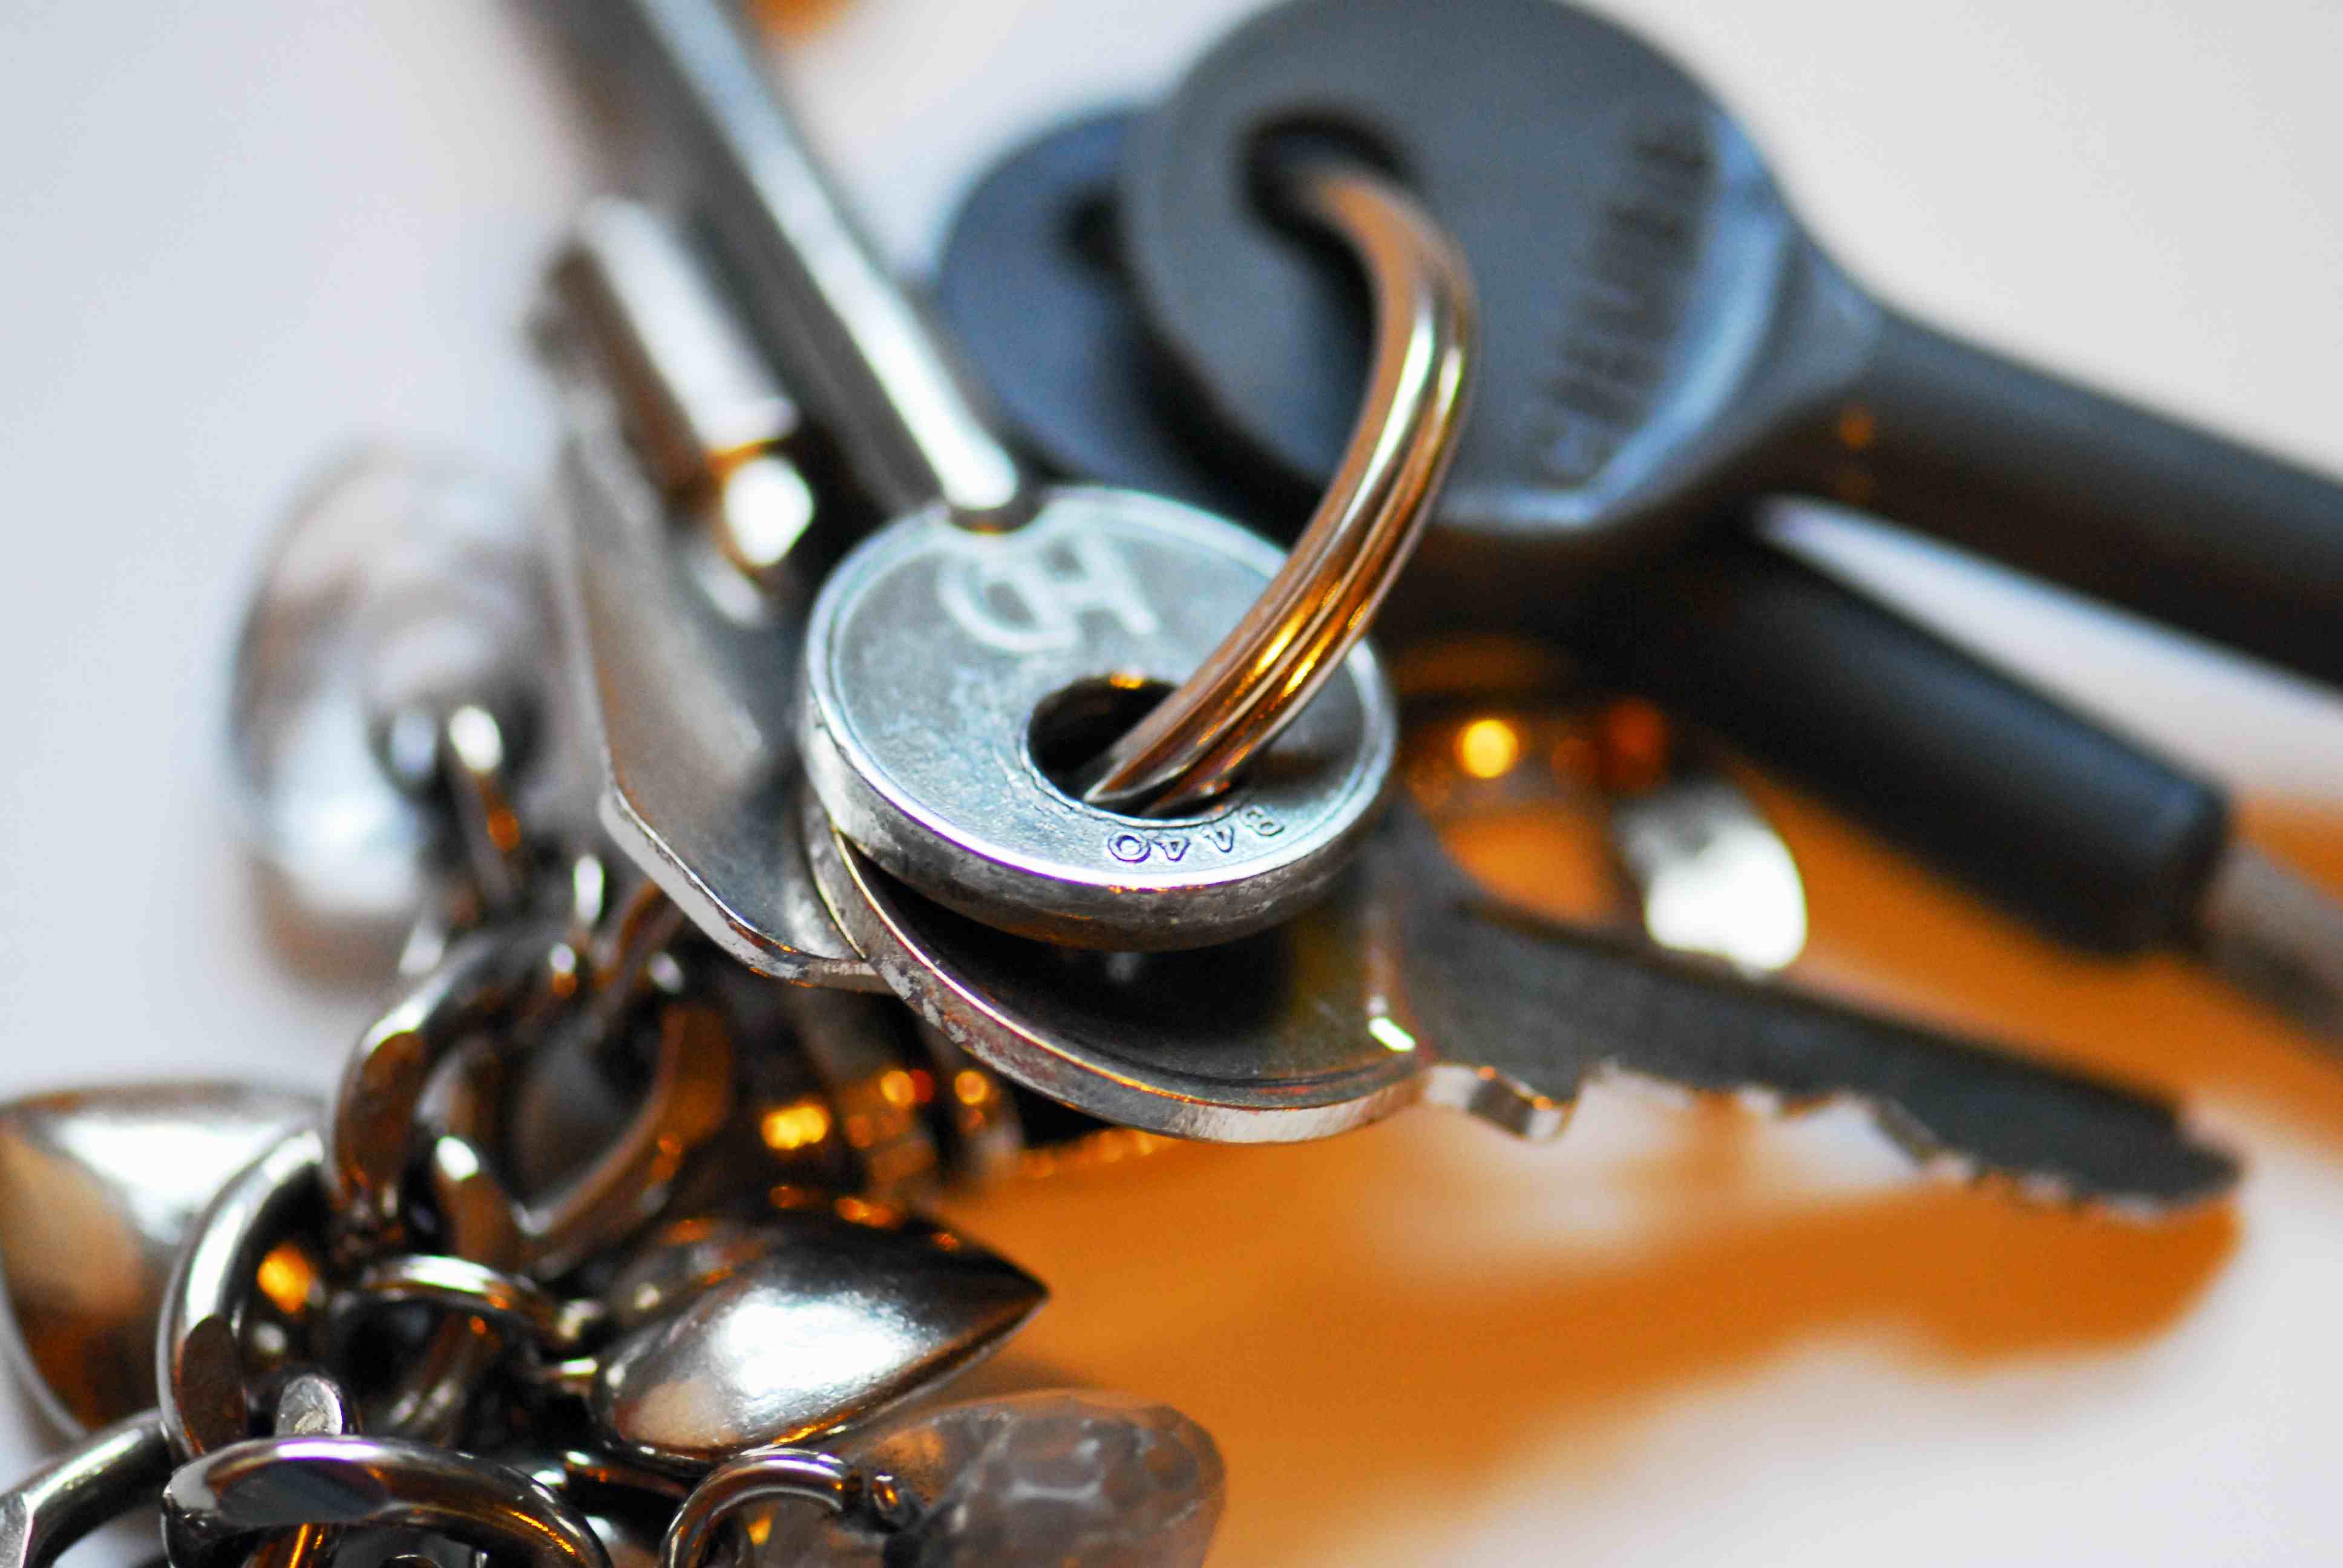 A heavy key chain could cause the ignition switch to move to the "off" position, shutting off the engine.